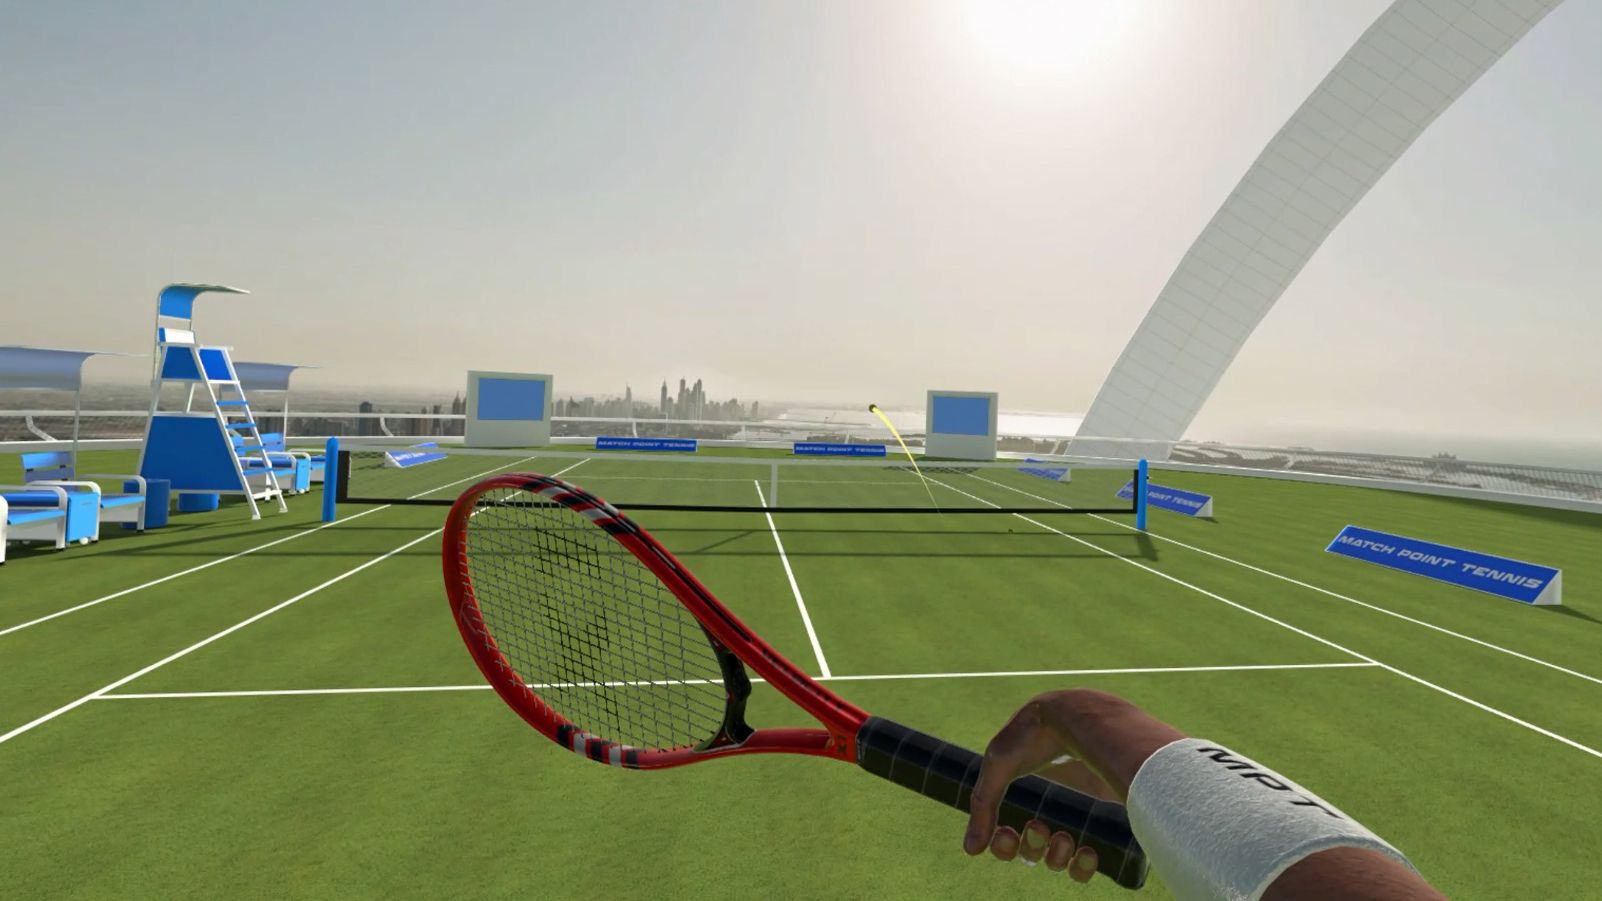 Match Point Tennis by backyardgames